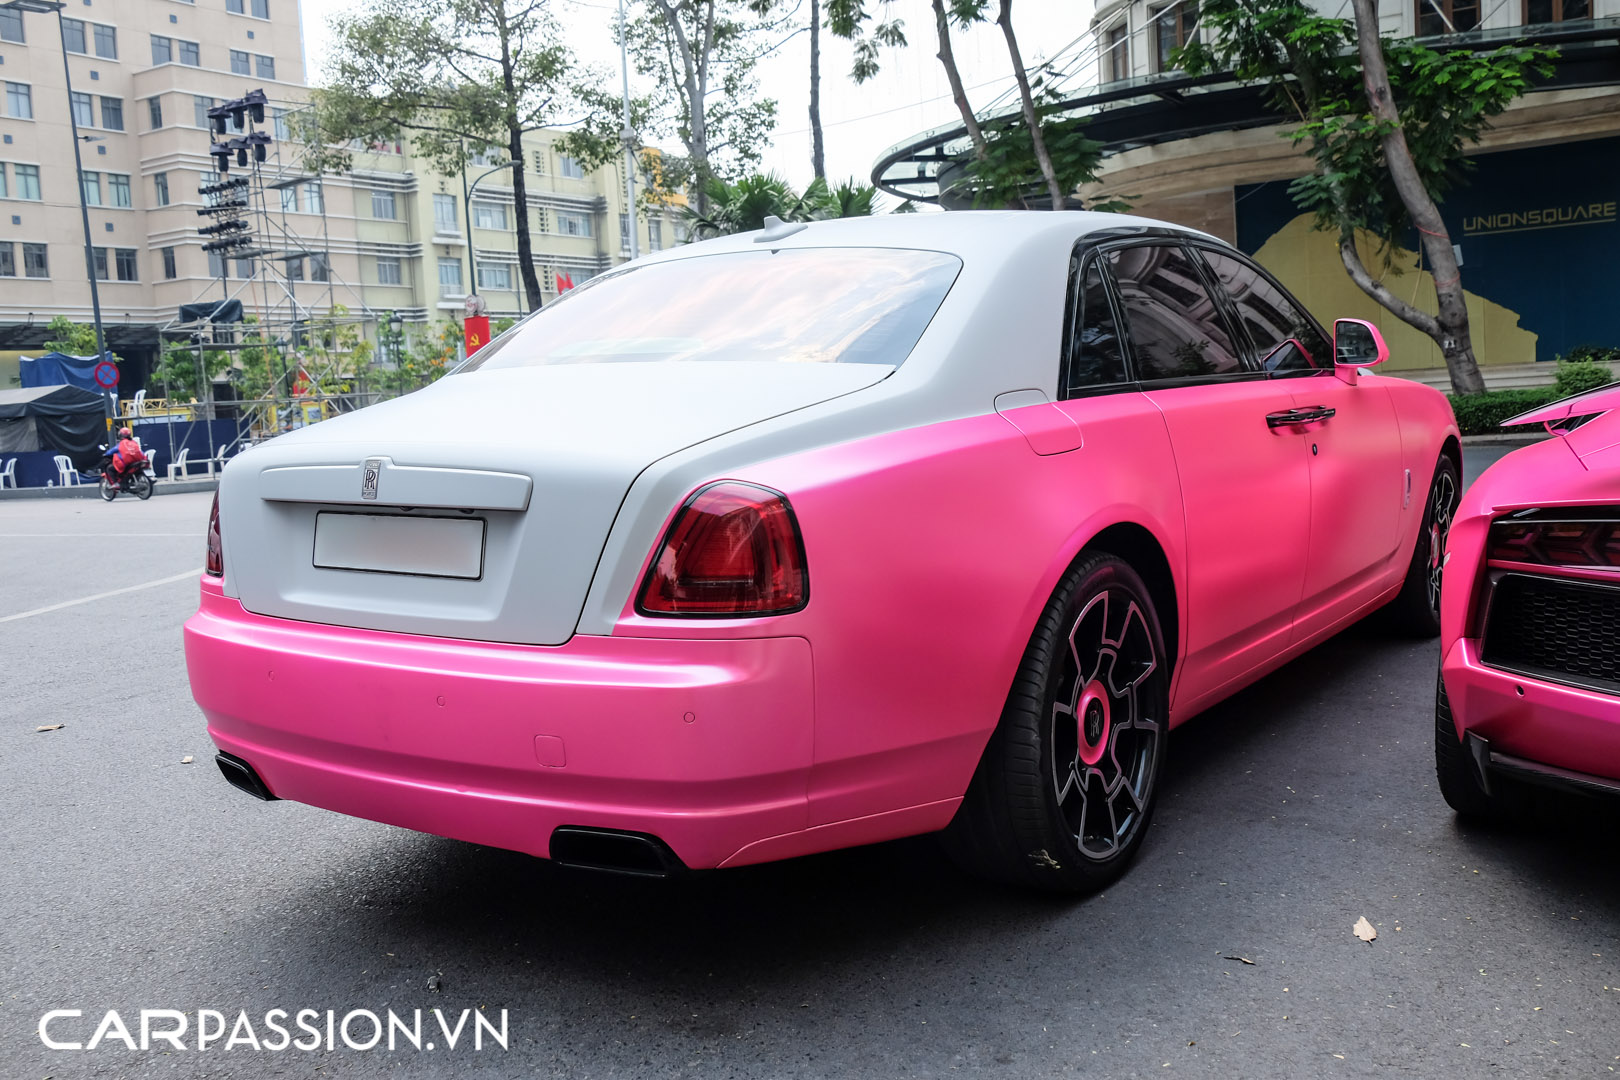 Pink RollsRoyce Ghost Is Why Some Car Makers Screen Their Customers   autoevolution